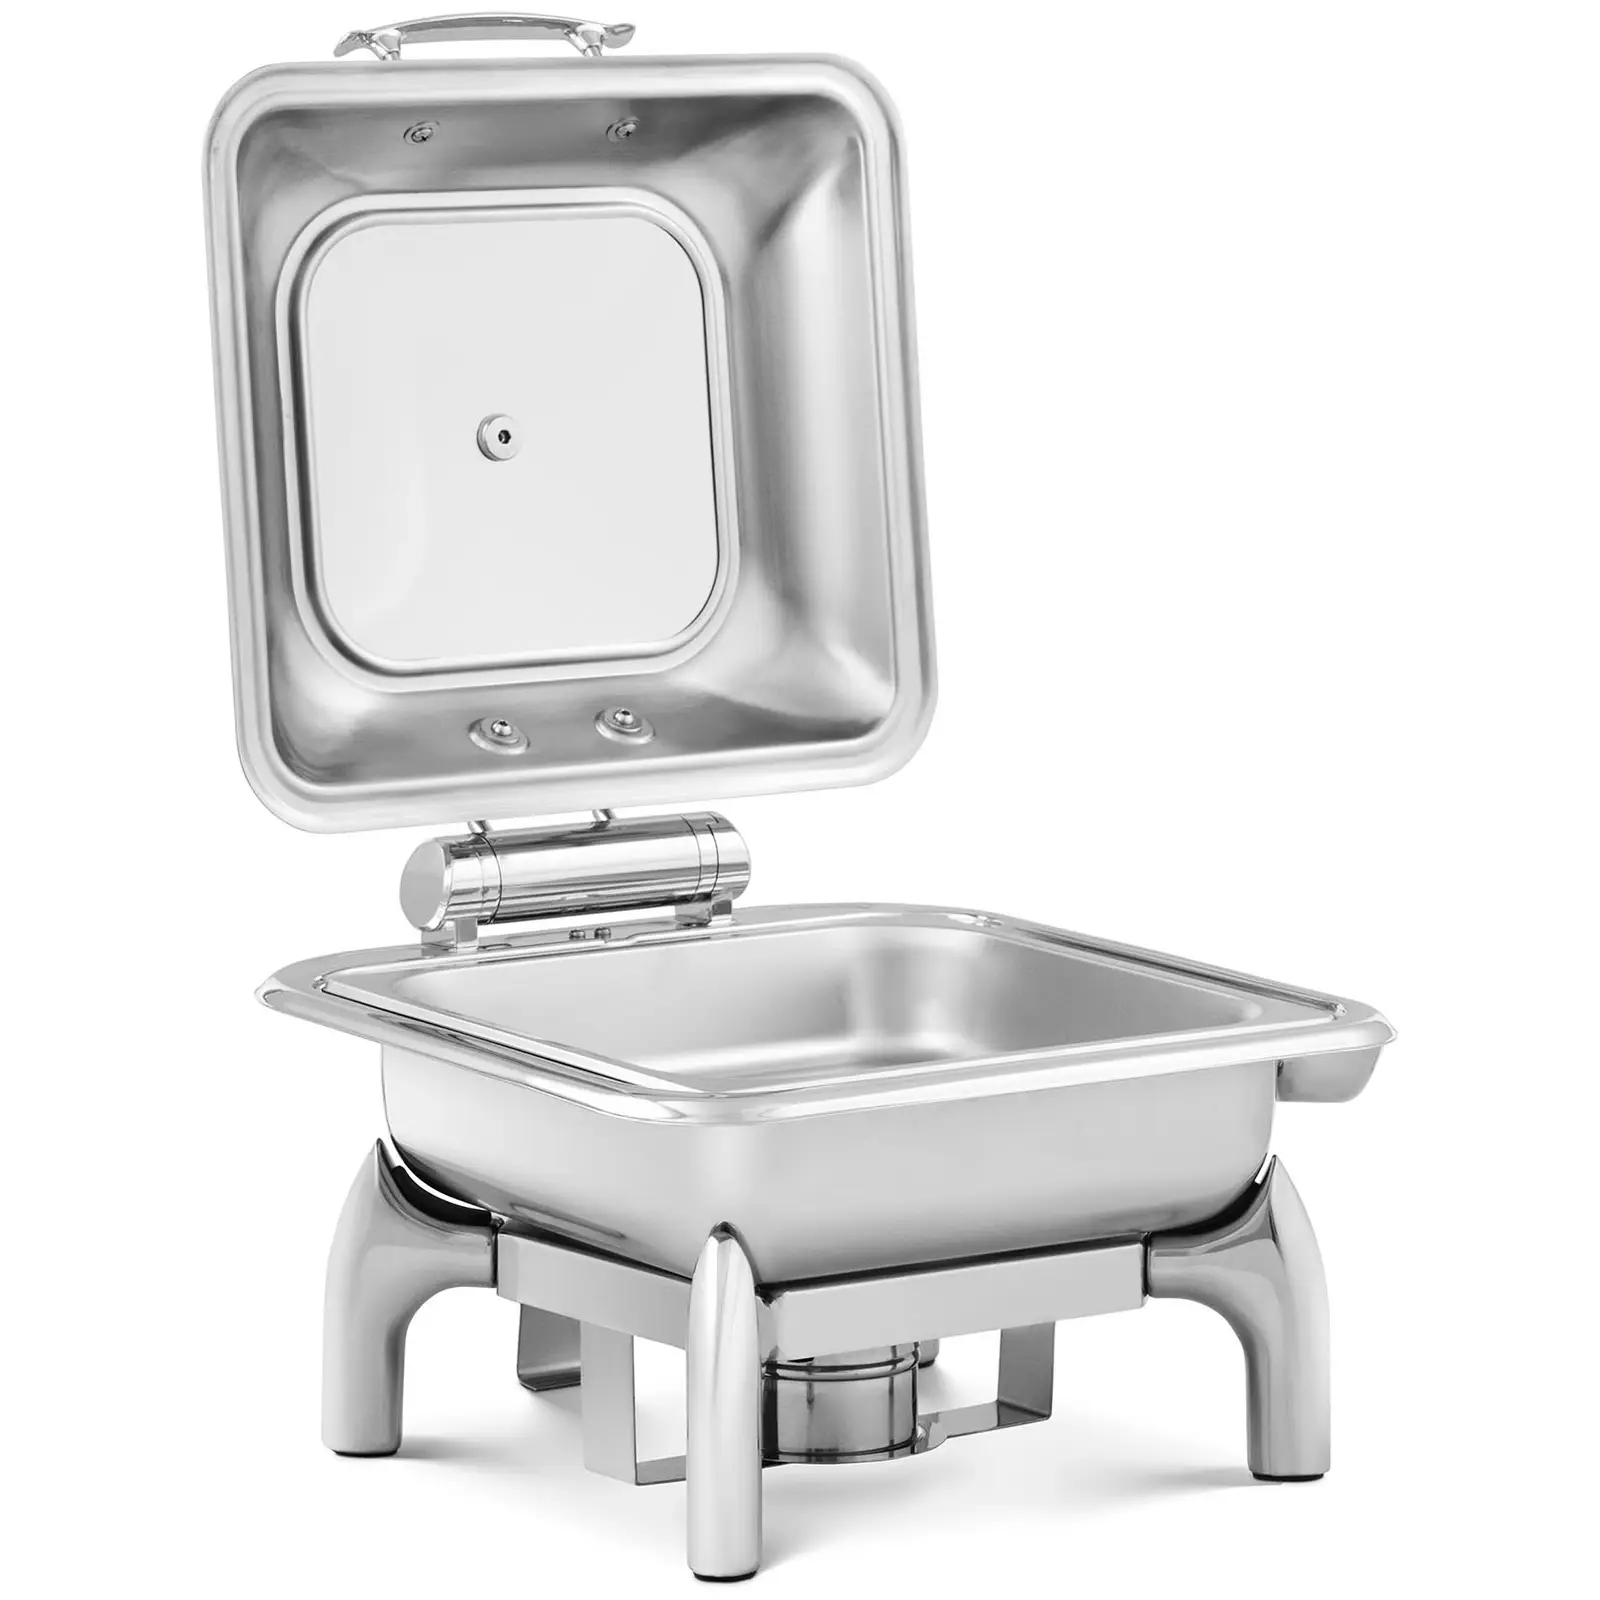 Chafing dish - GN 2/3 - Royal Catering - 5,3 L - 1 bränsleceller